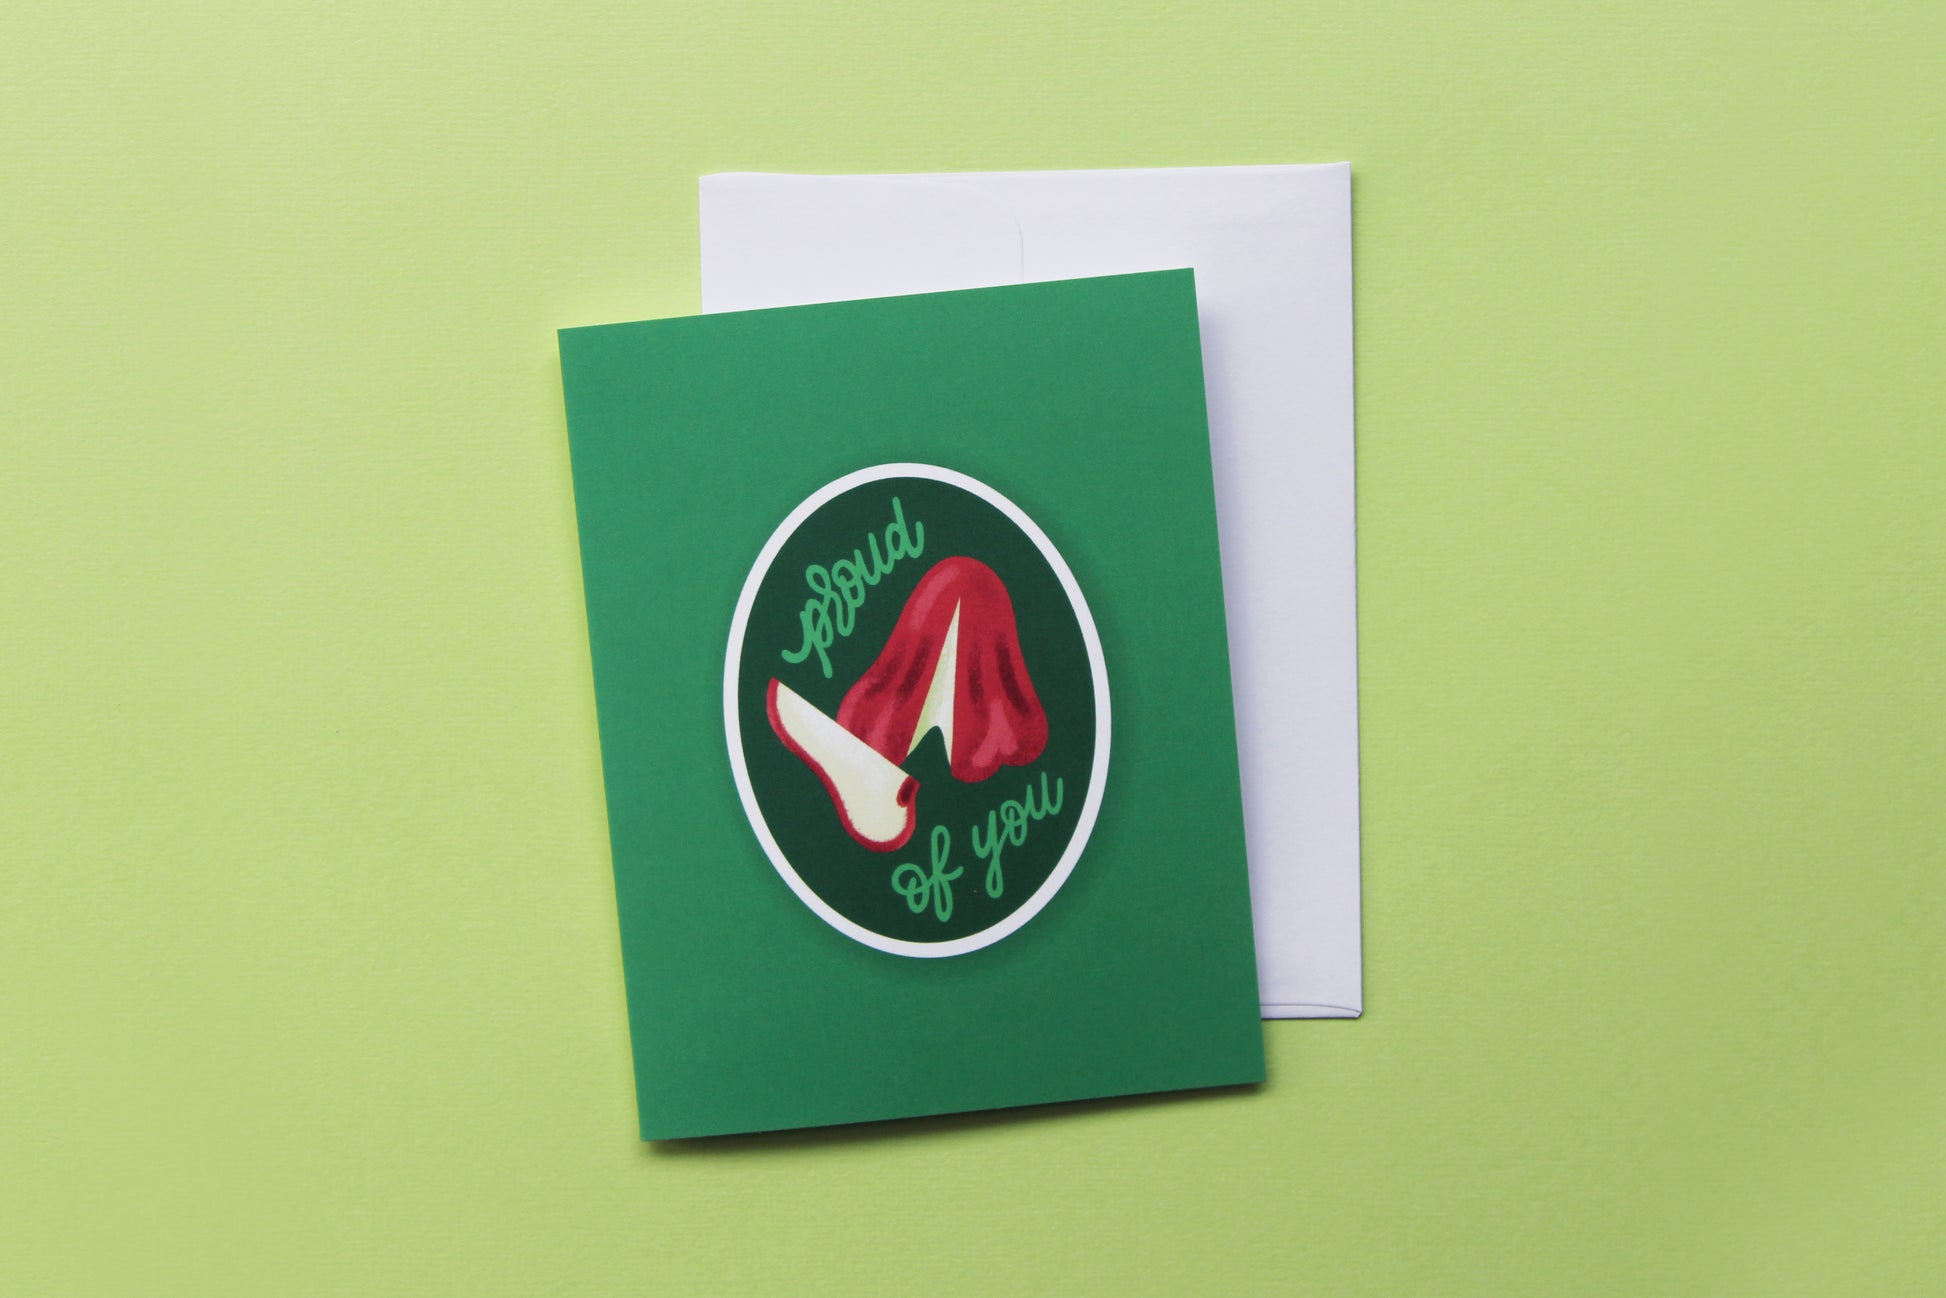 A photo of a green greeting card with a sliced wax apple that says "Proud of you" and a white envelope on a green background.